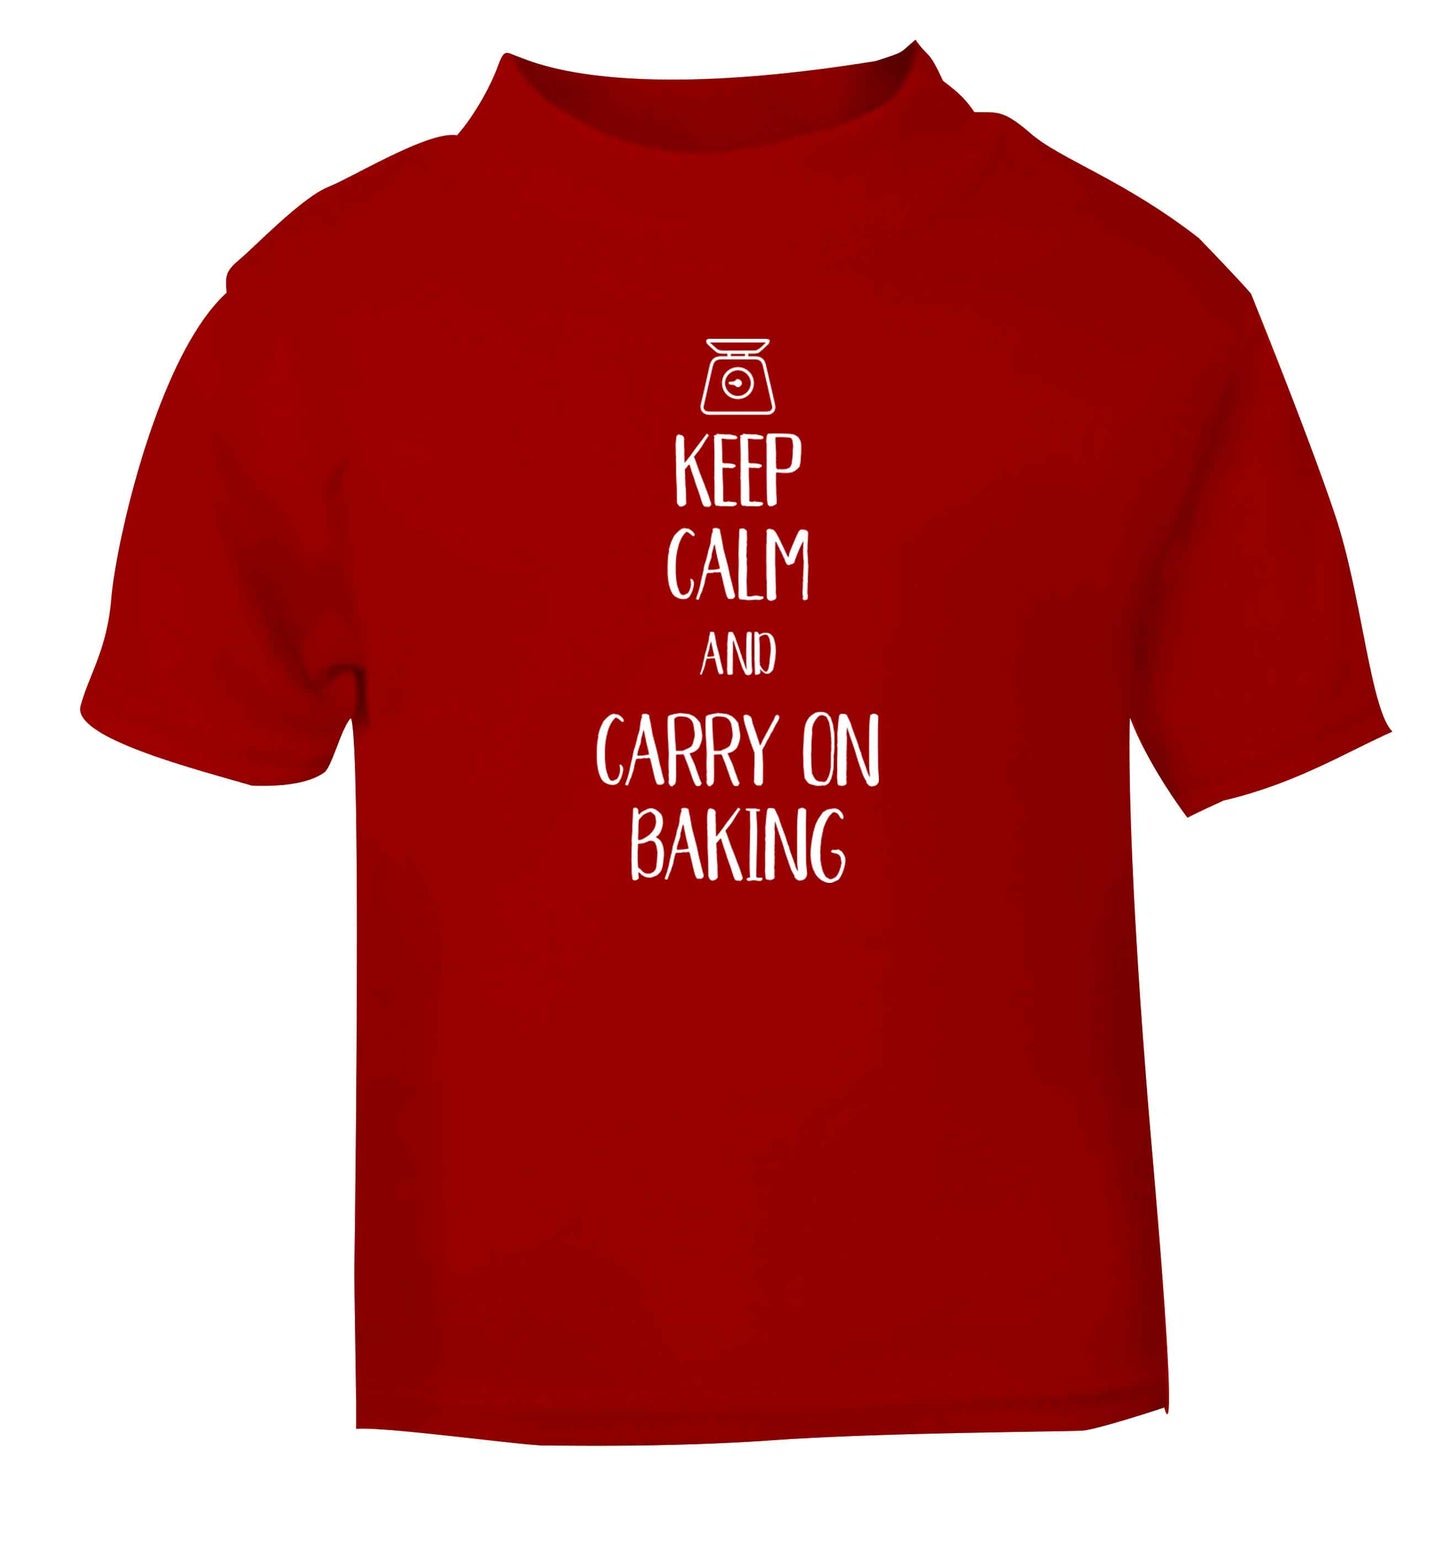 Keep calm and carry on baking red Baby Toddler Tshirt 2 Years